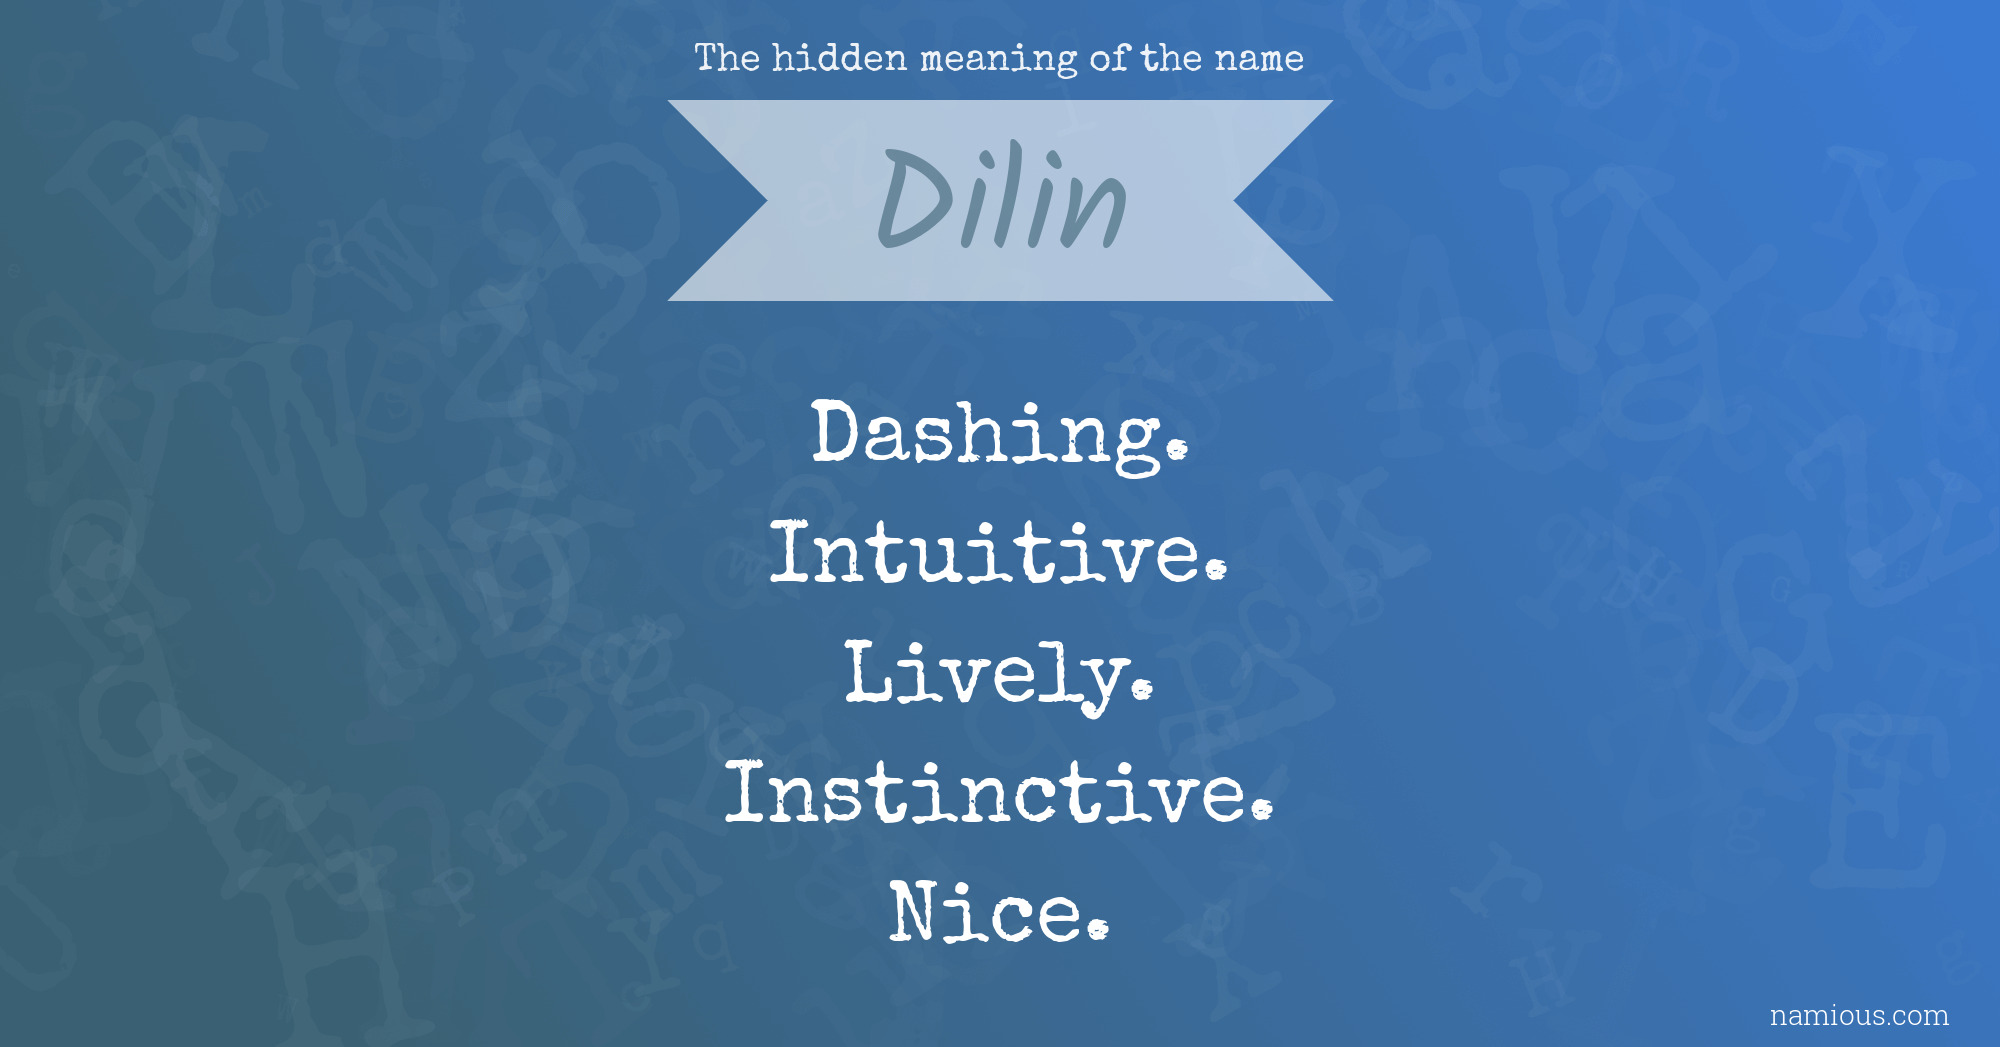 The hidden meaning of the name Dilin